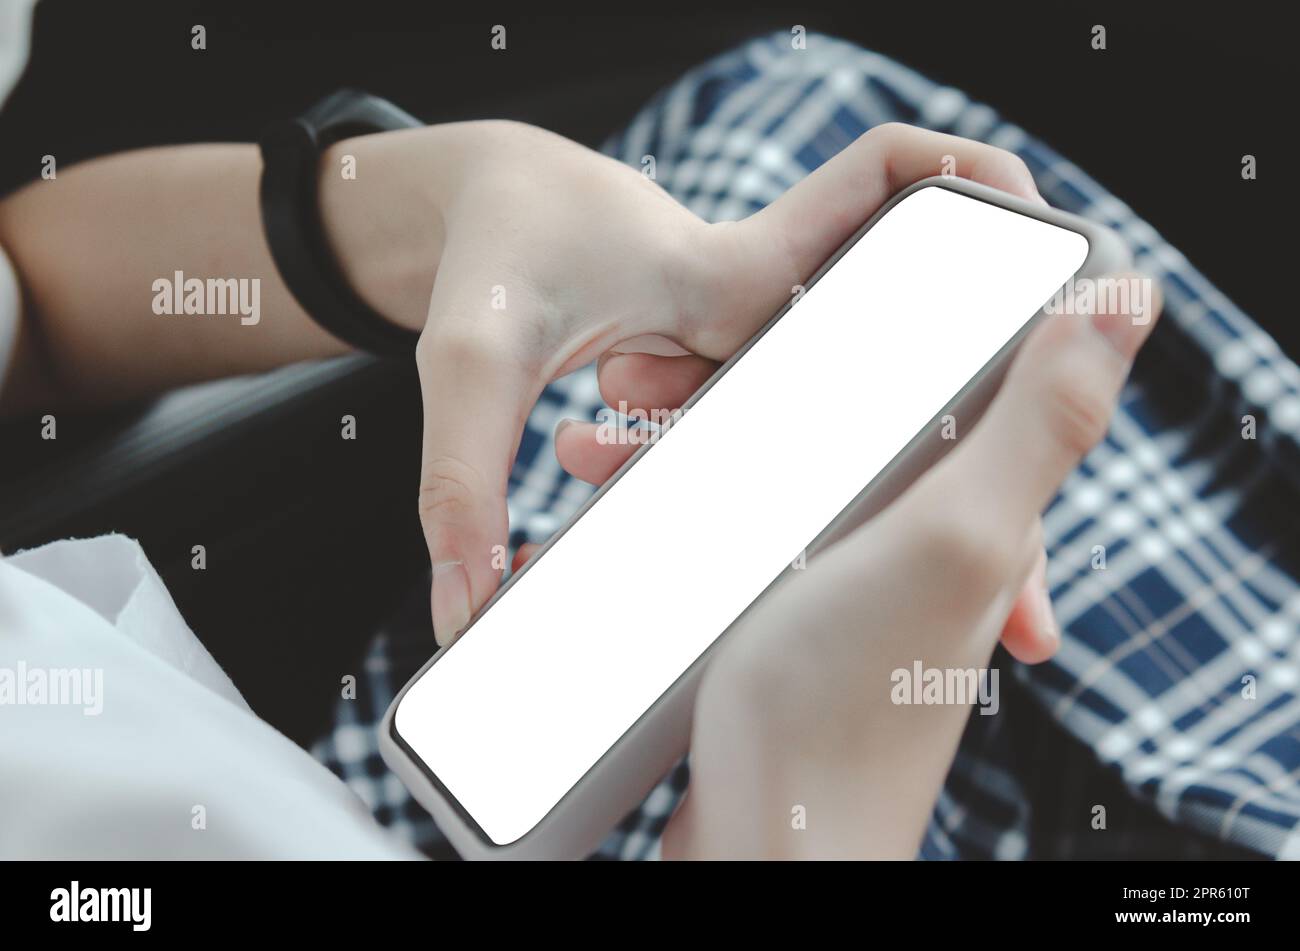 woman hand holding a mobile phone in the car cabin.Blank with white screen.Mock up smart phone interior car. Stock Photo